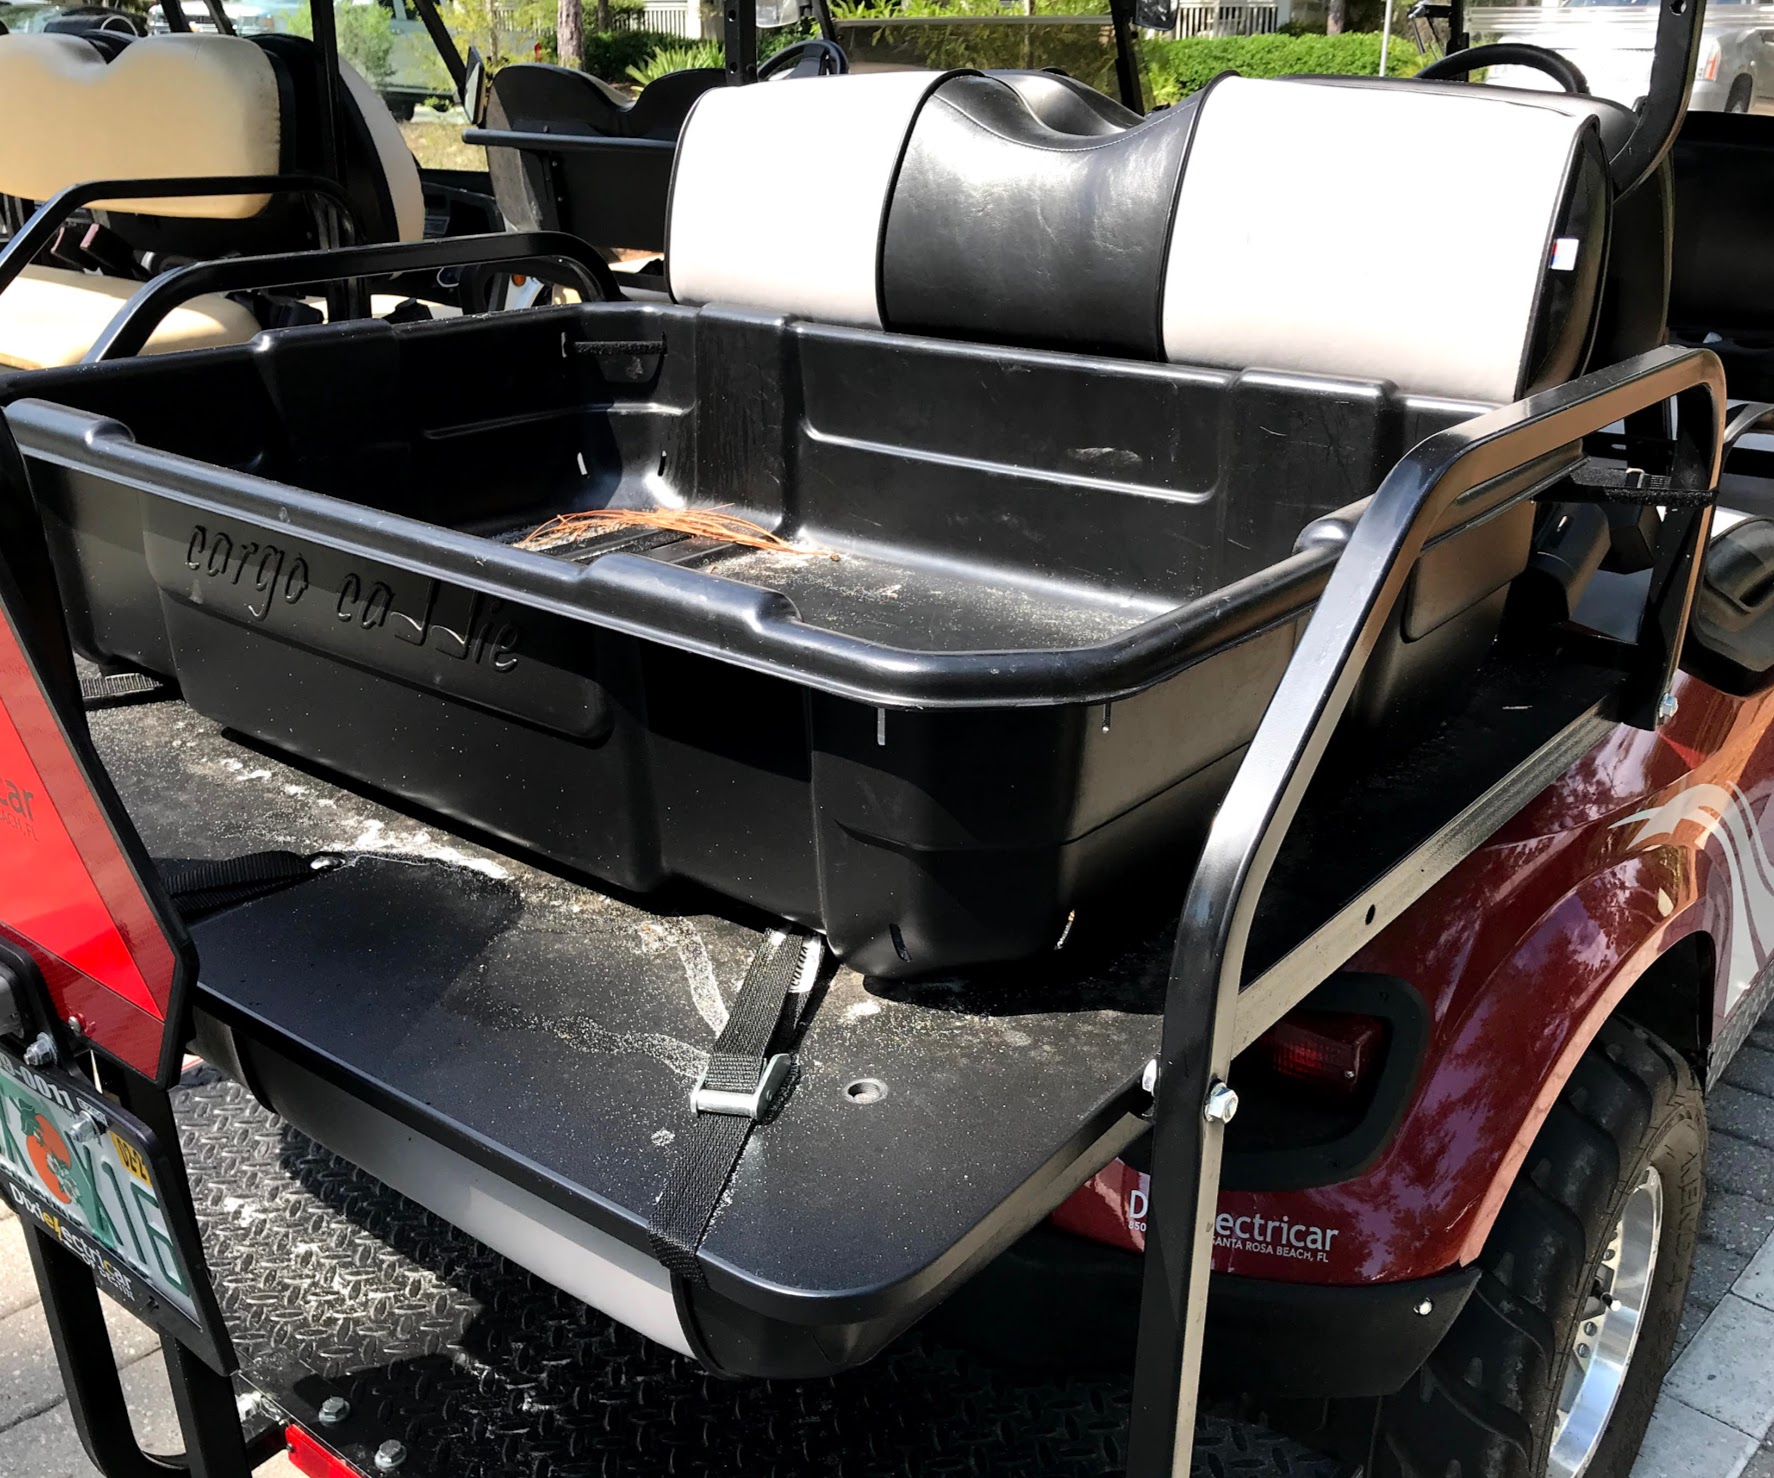 EZ Go Golf Cart Parts - Get The Right Part at the Right Price